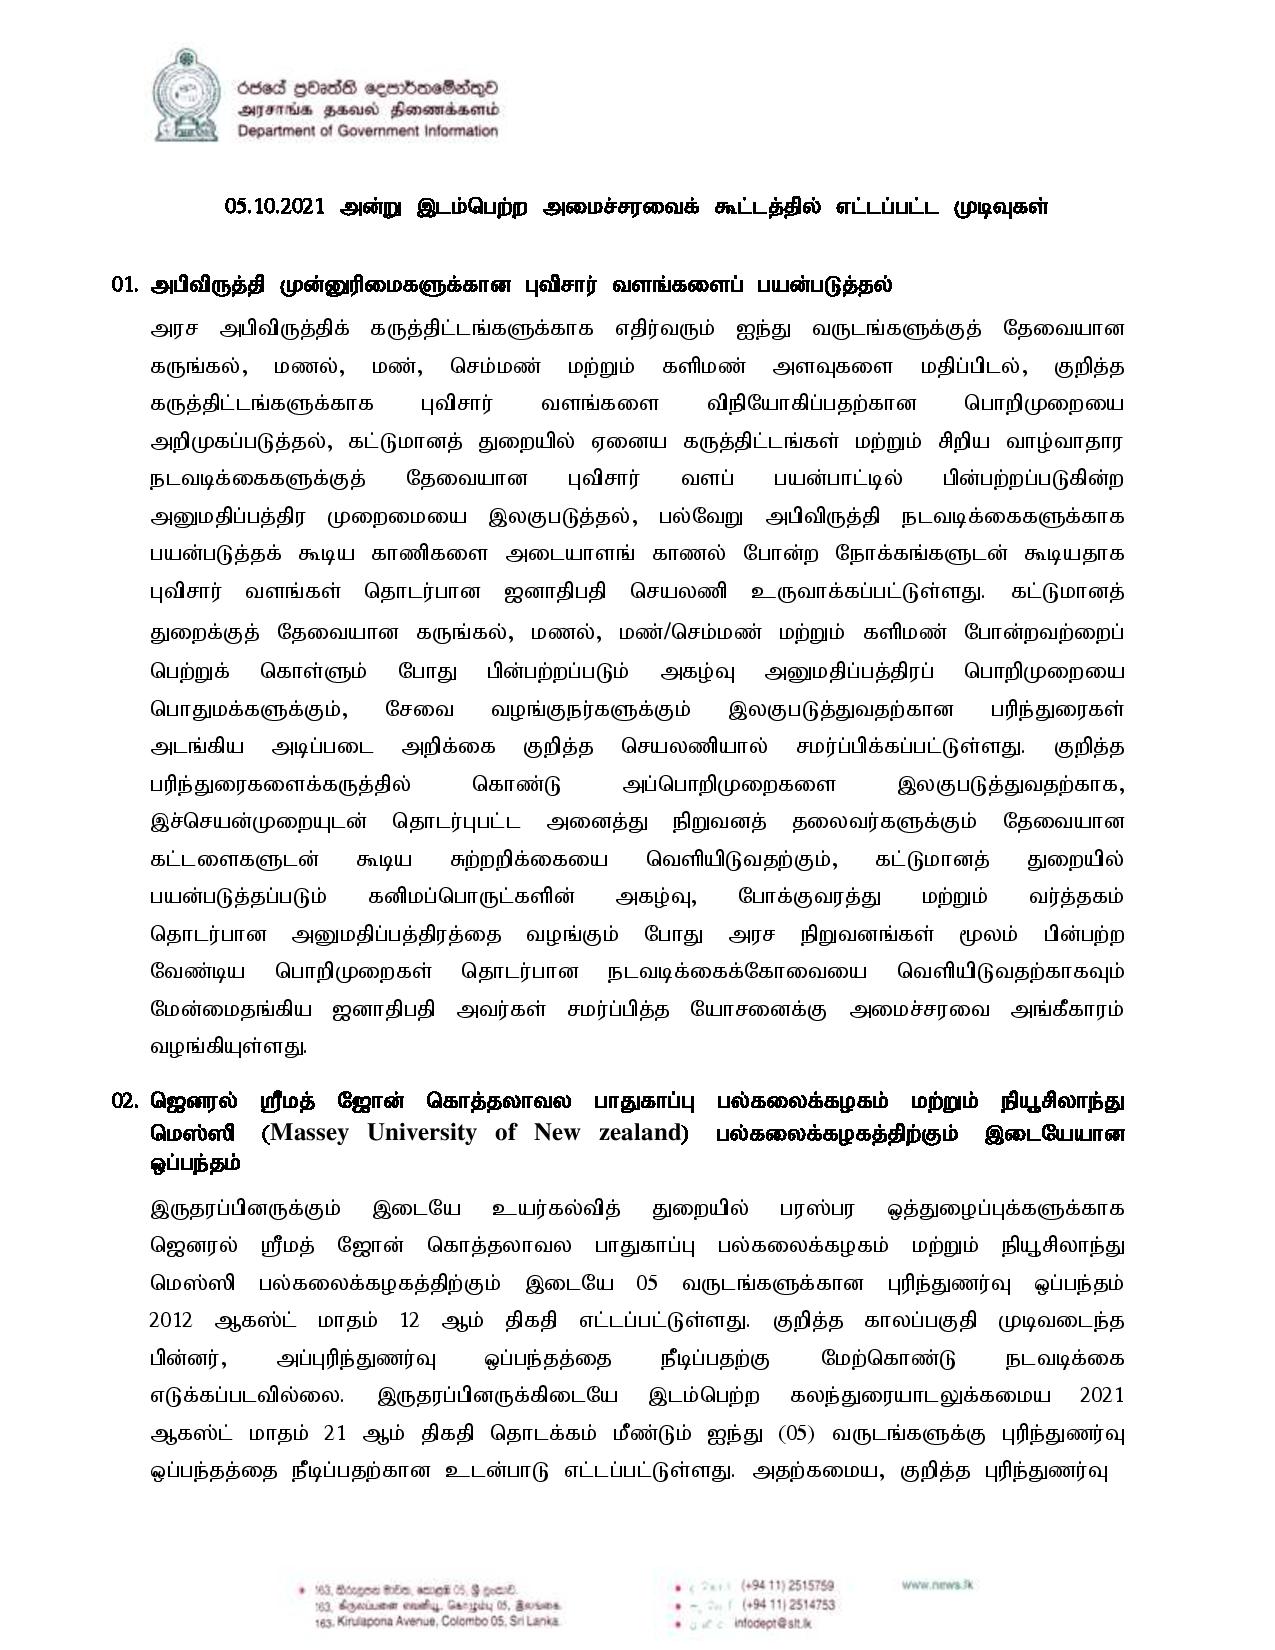 Cabinet Decision on 05.10.2021 Tamil page 001